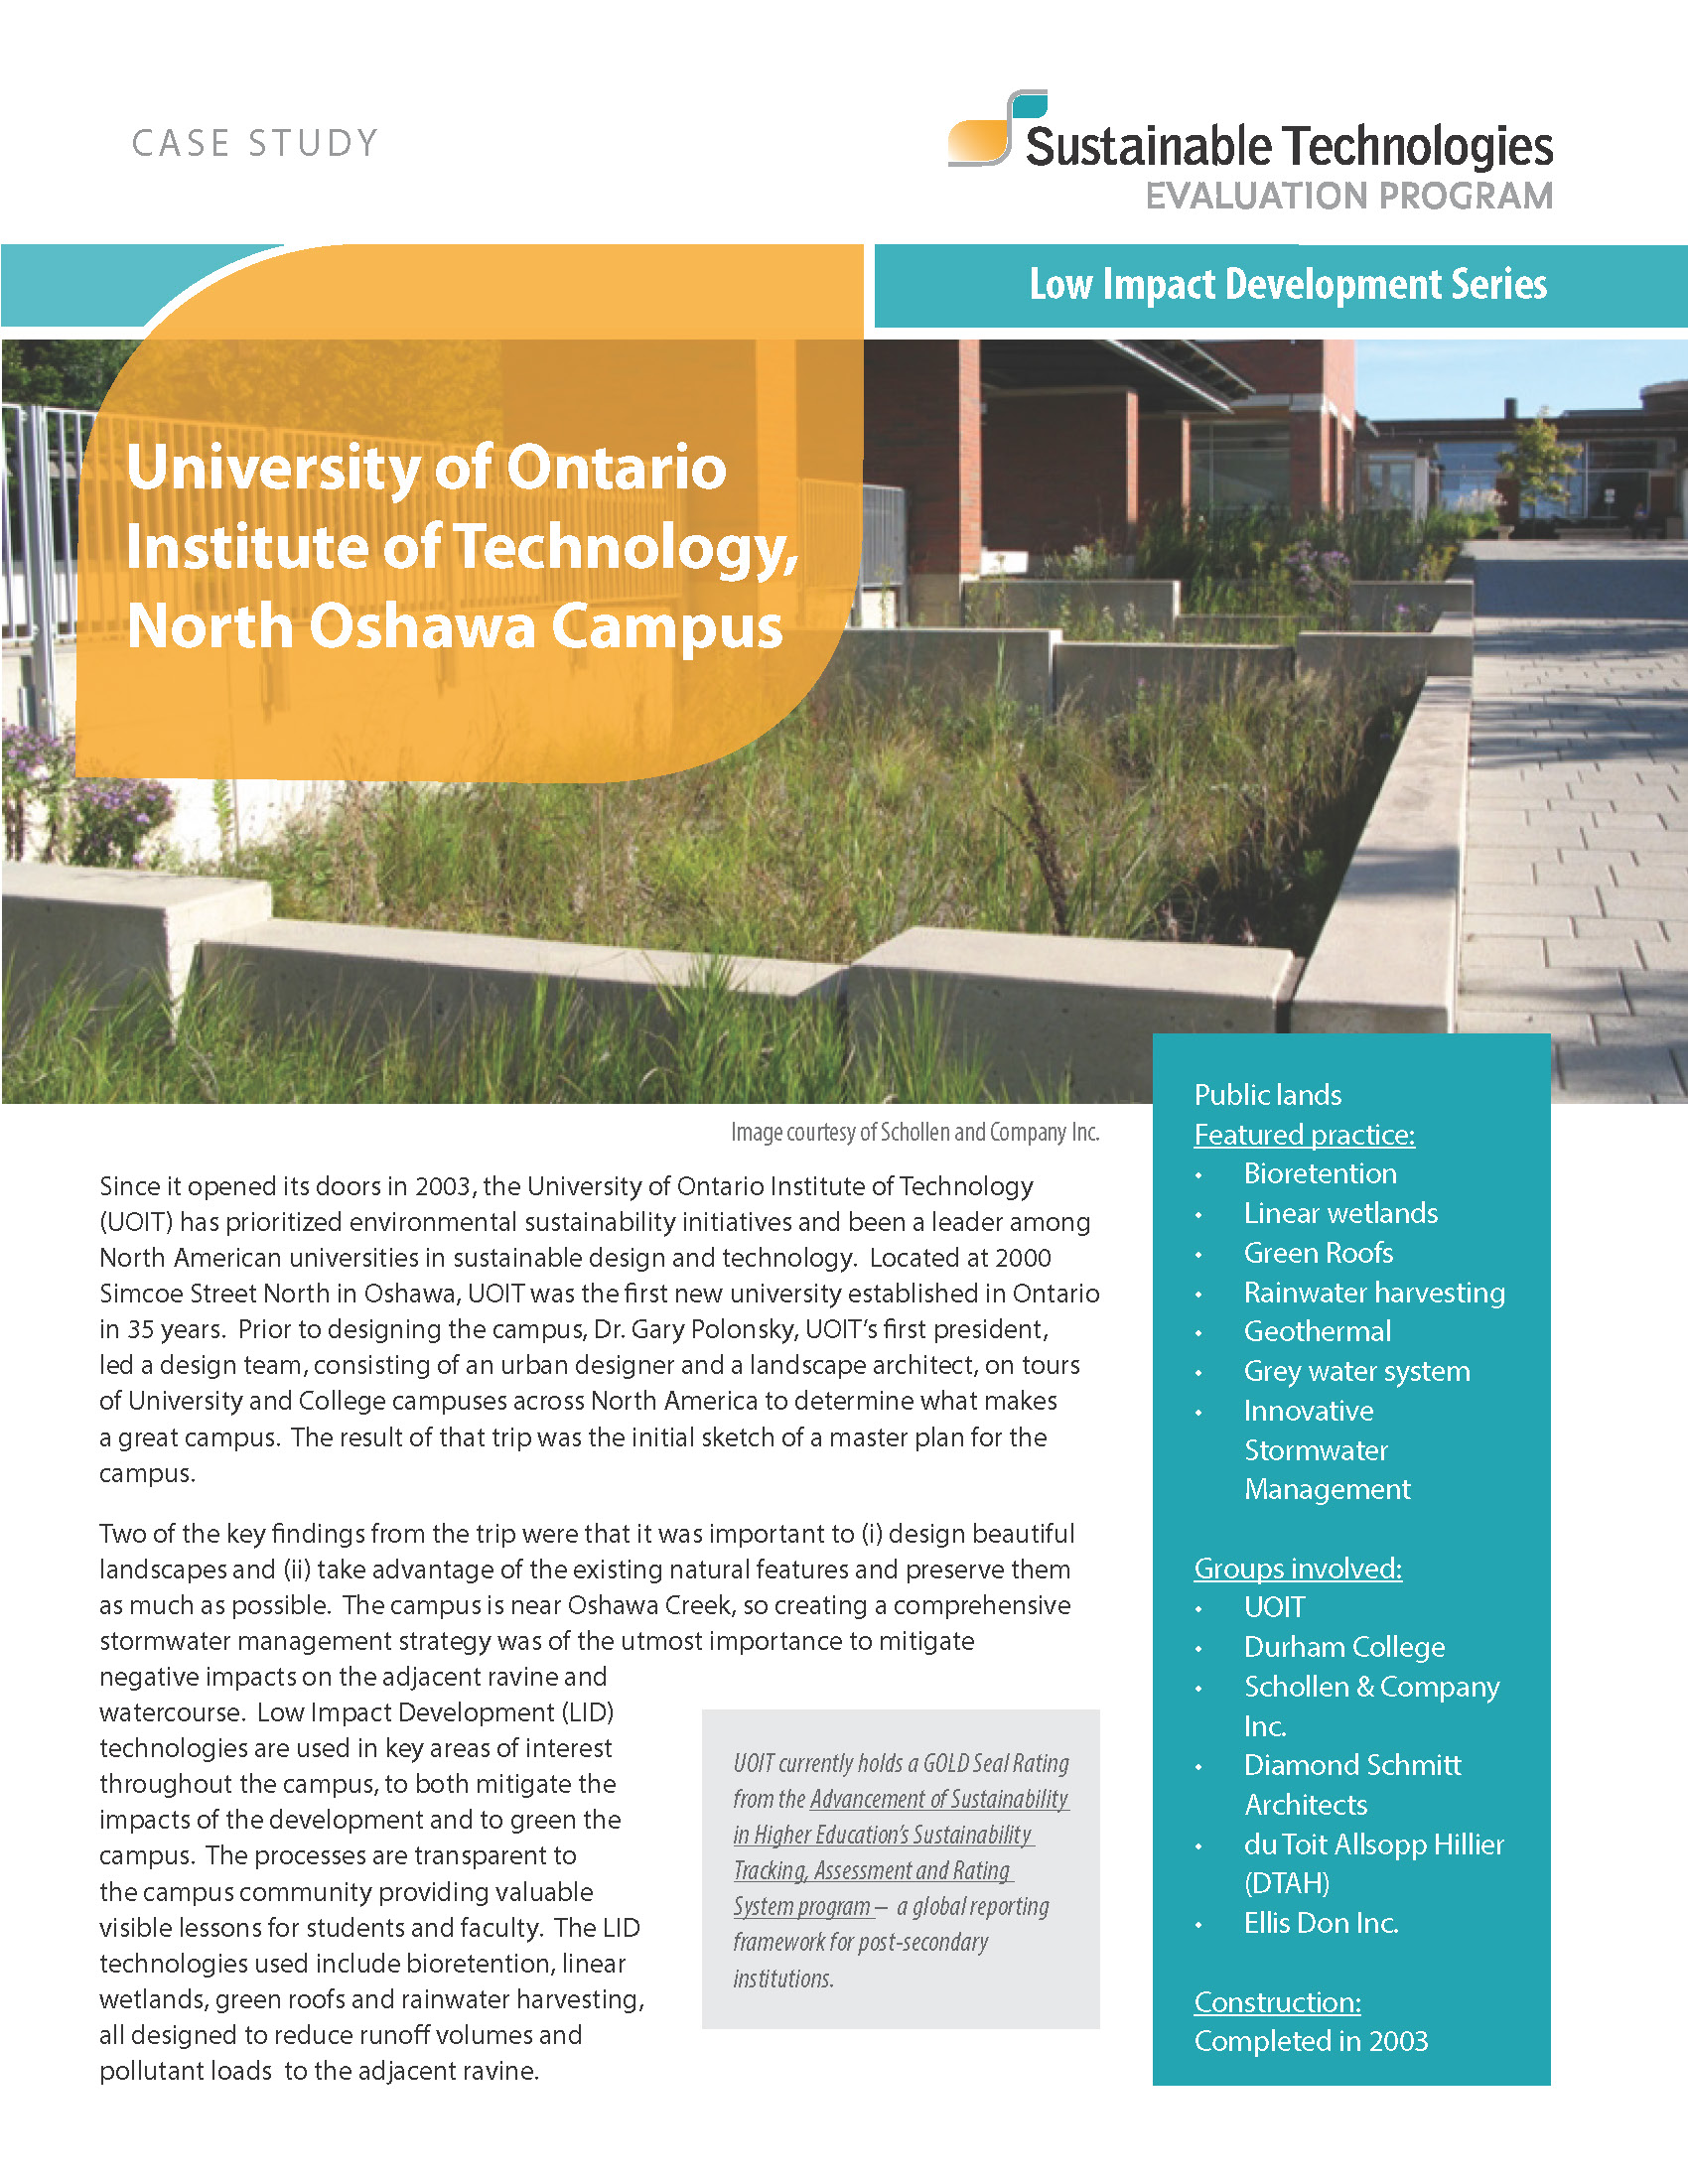 First page of a document outlining how low impact development technology was used for the University of Ontario Institute of Technology, North Oshawa Campus